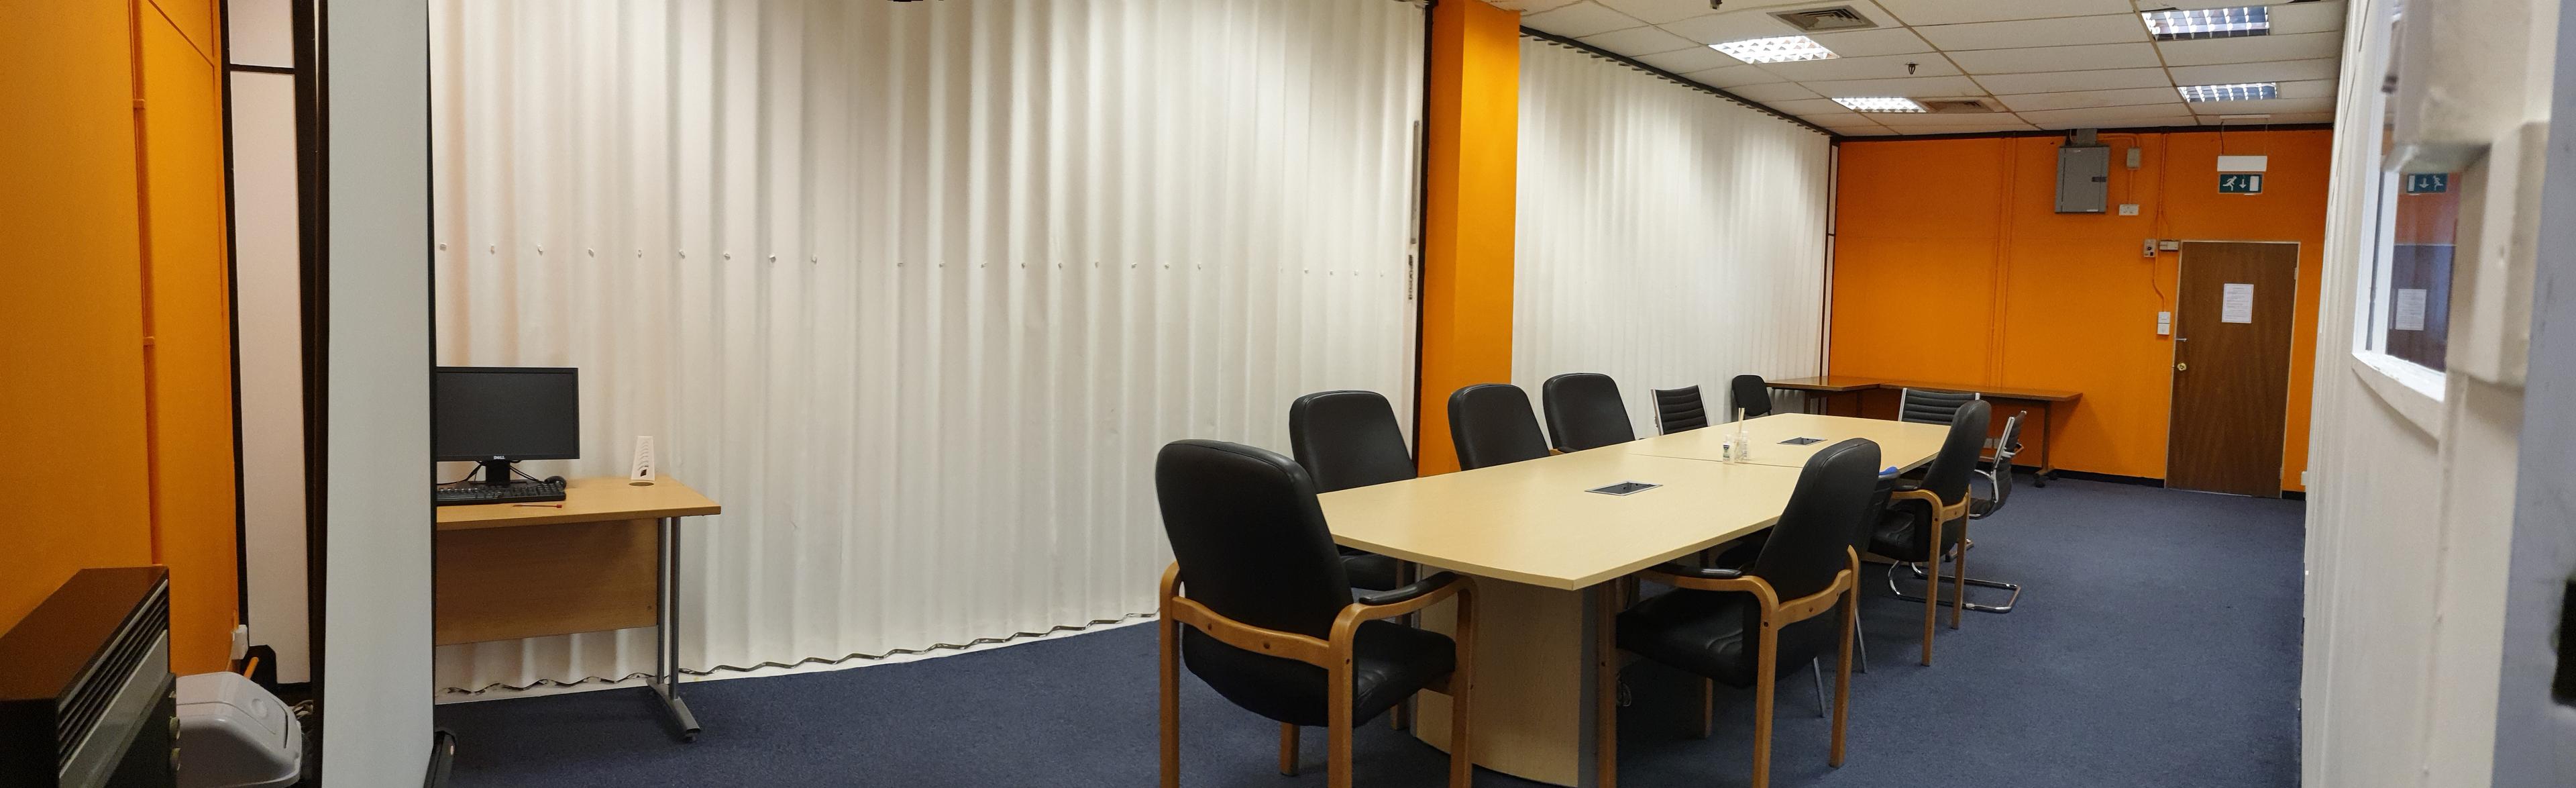 The Woolwich College, Boardroom photo #1